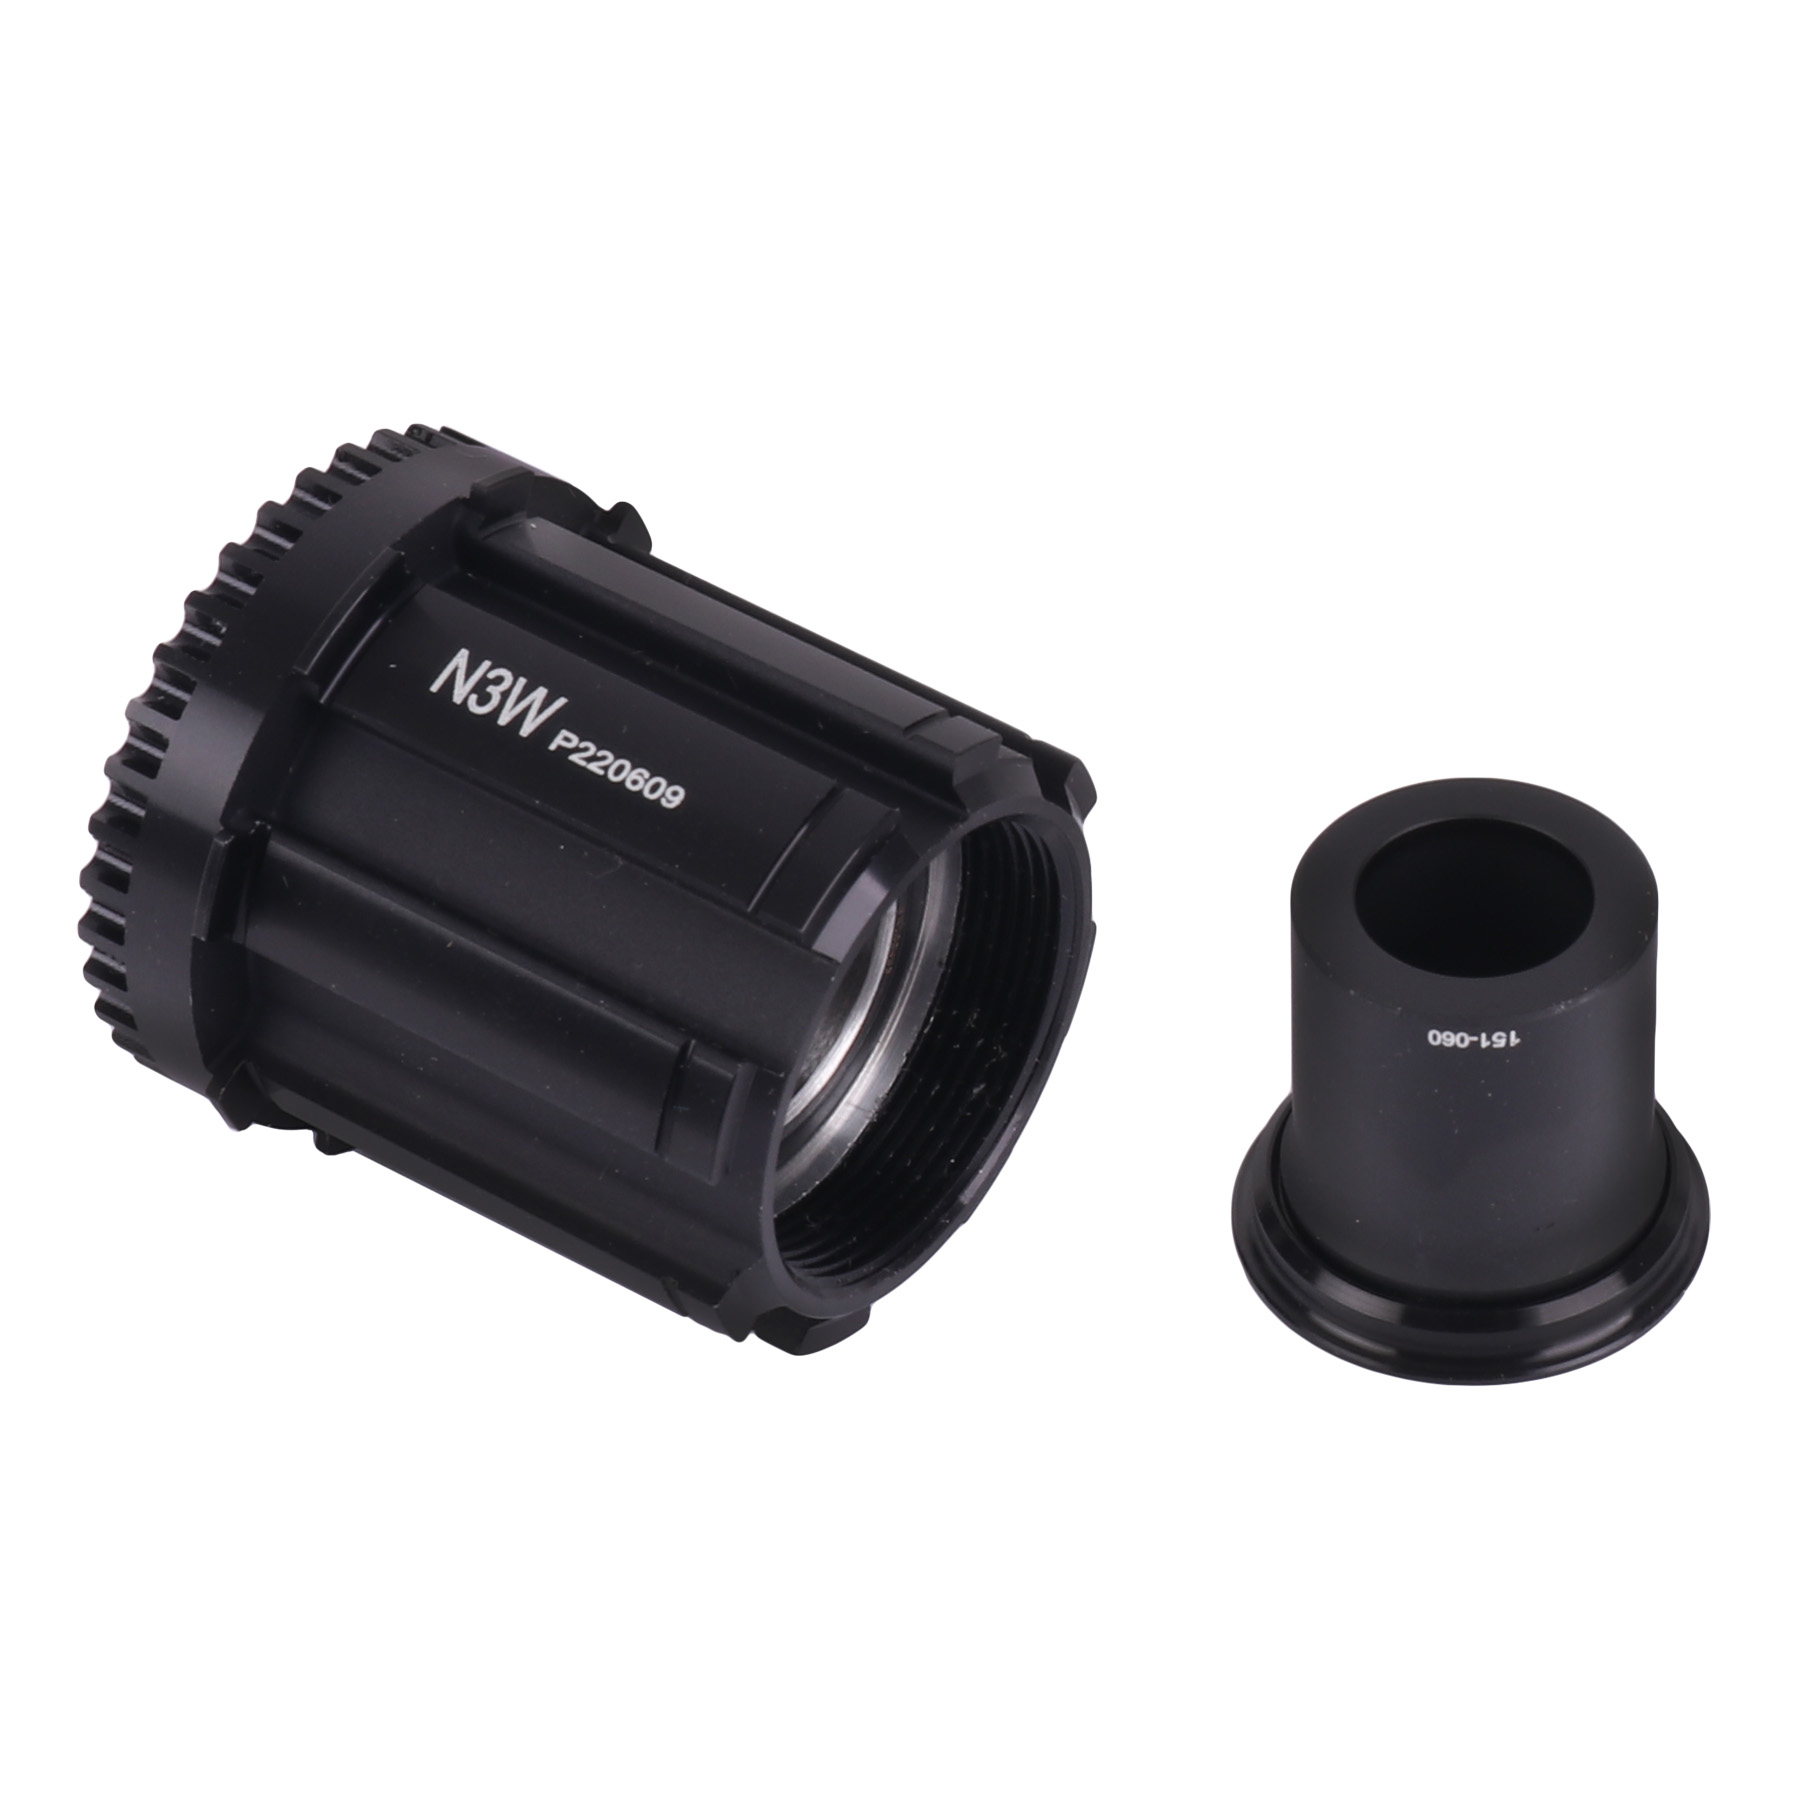 Picture of ZIPP Freehub Kit for Cognition Disc Rear Hubs - 11.2018.065.011 | Campagnolo N3W